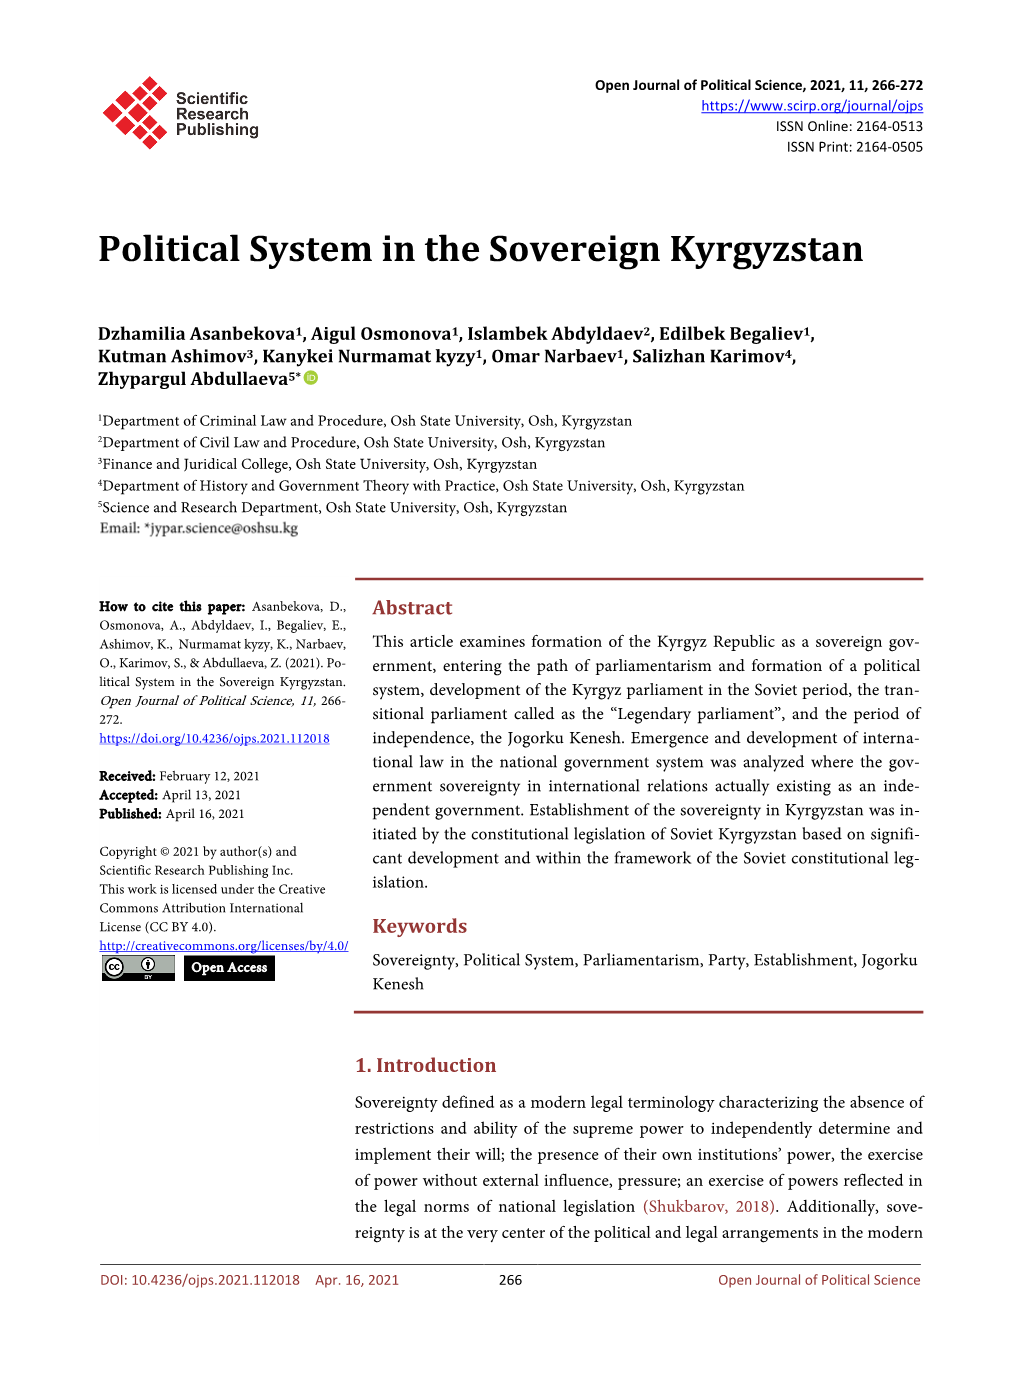 Political System in the Sovereign Kyrgyzstan